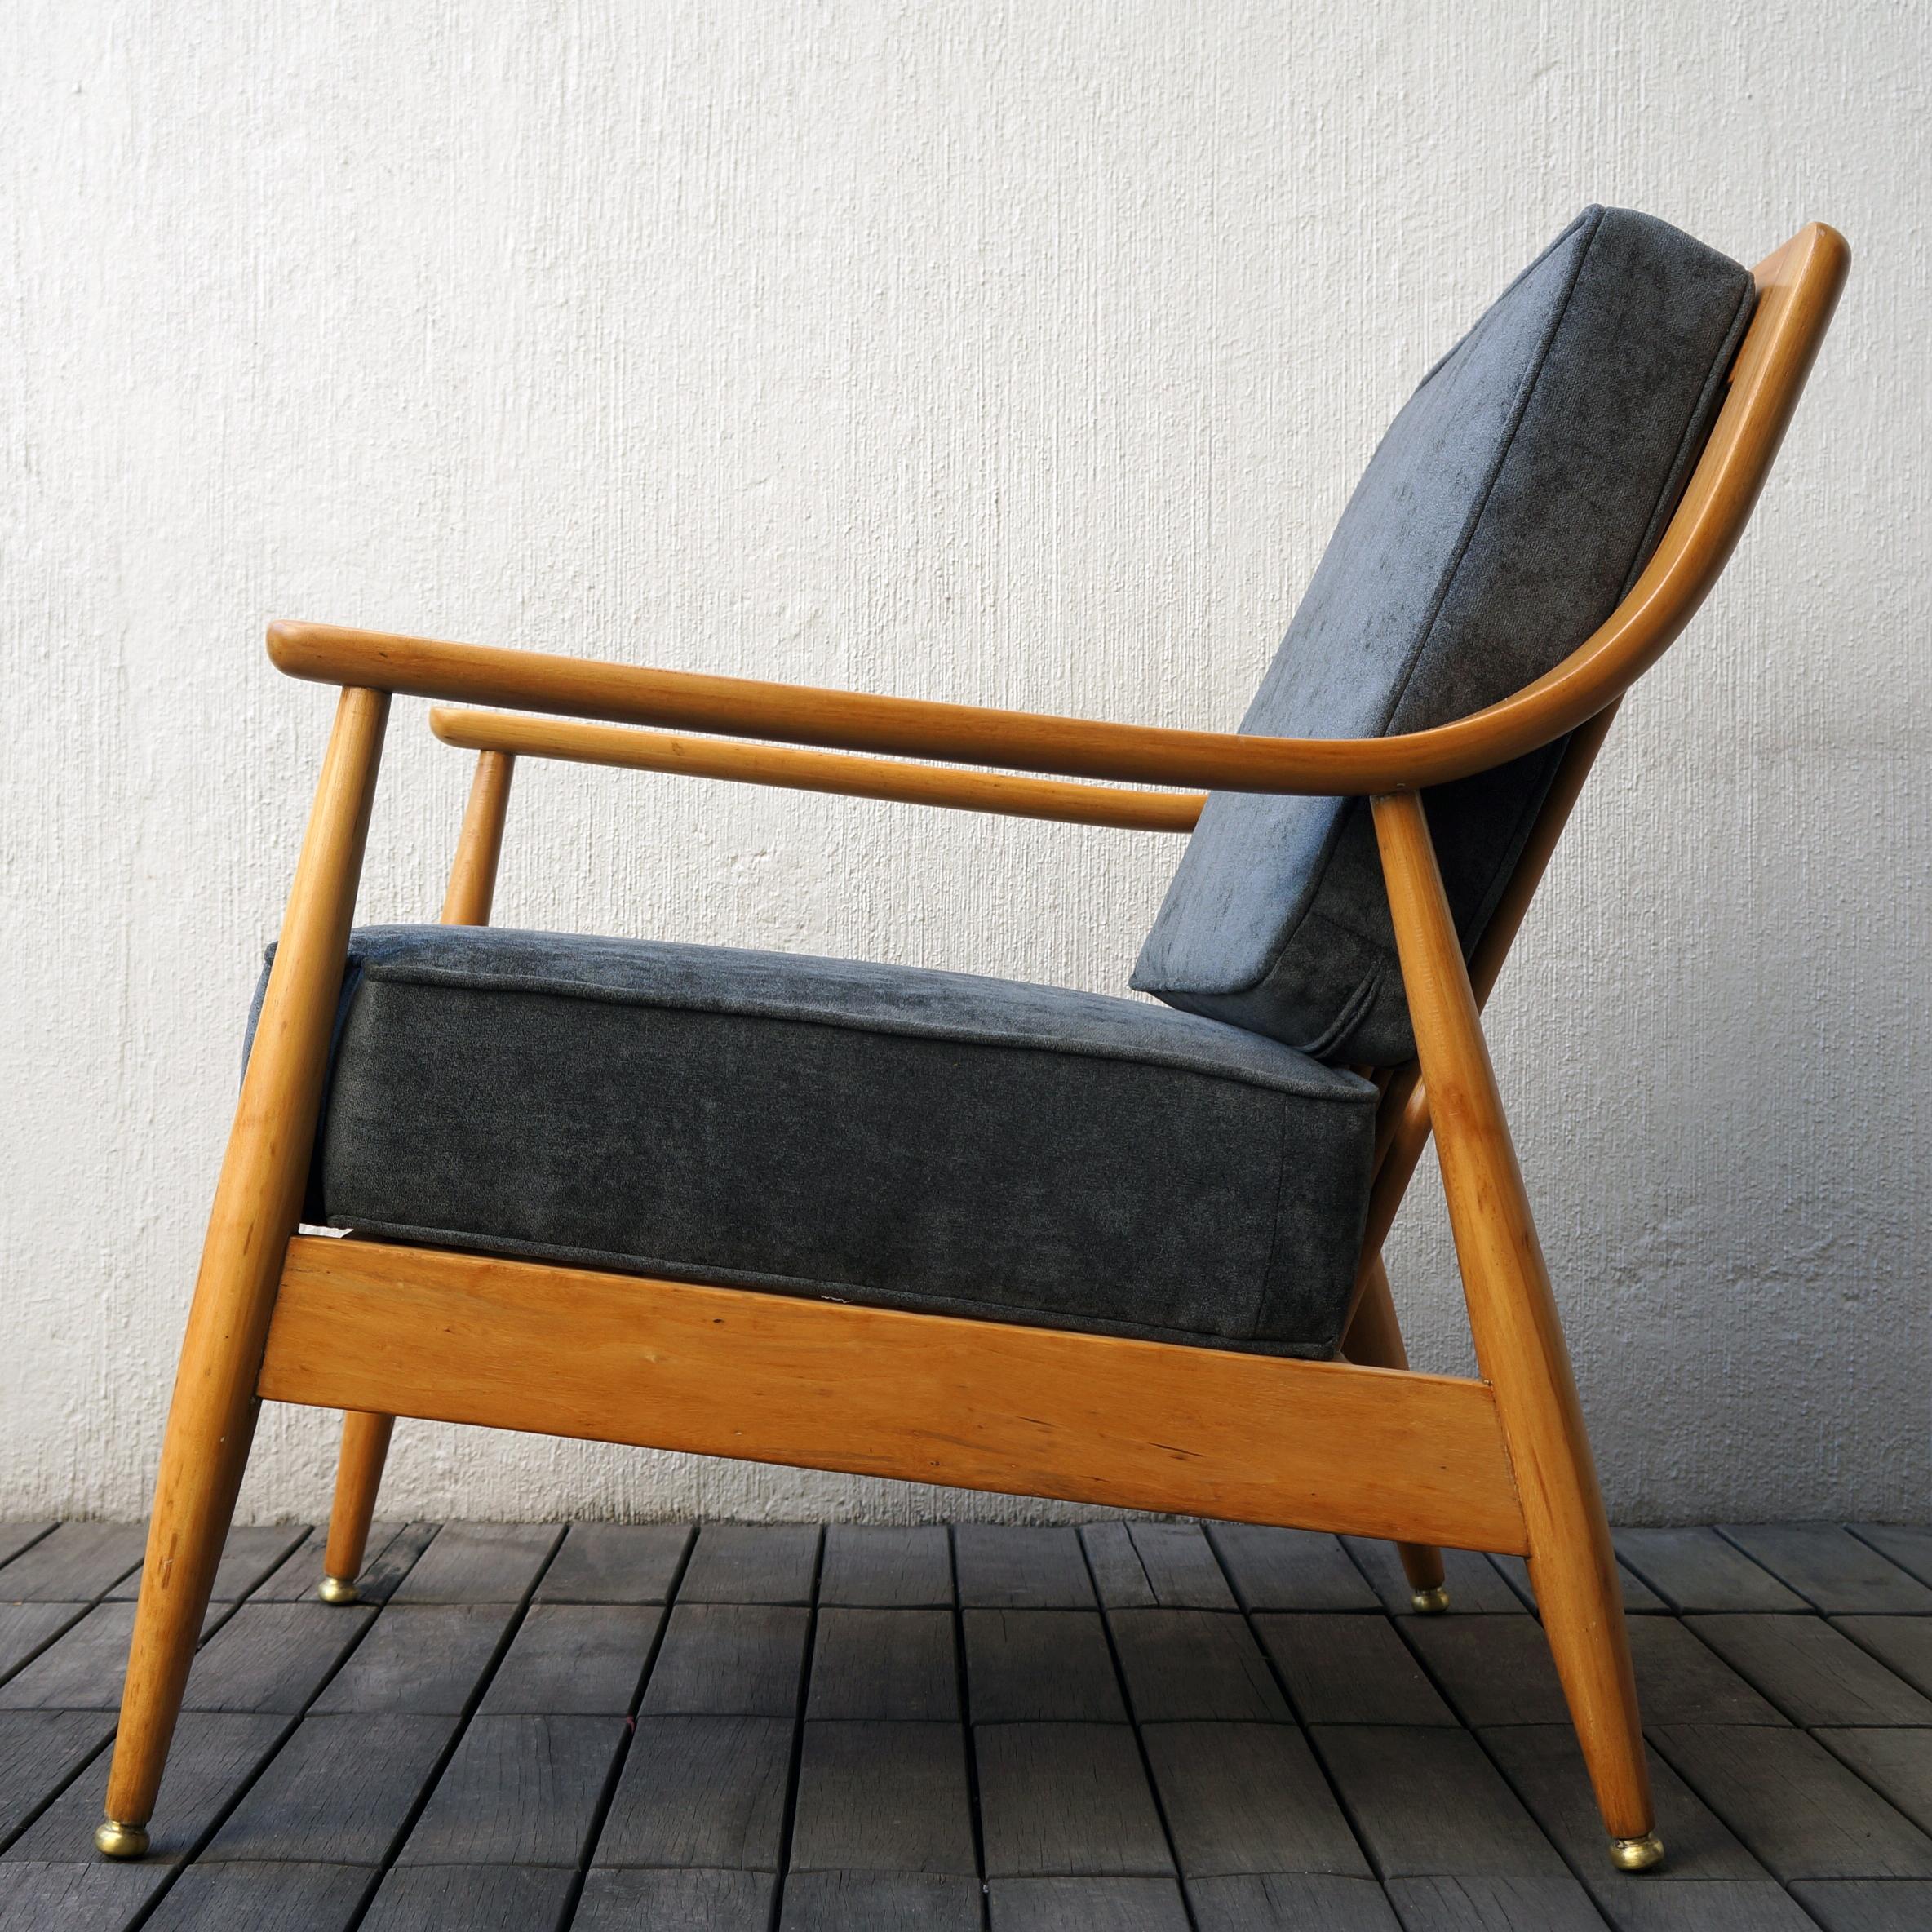 Mid-Century Modern Mexican Midcentury Lounge Chair, “Malinche